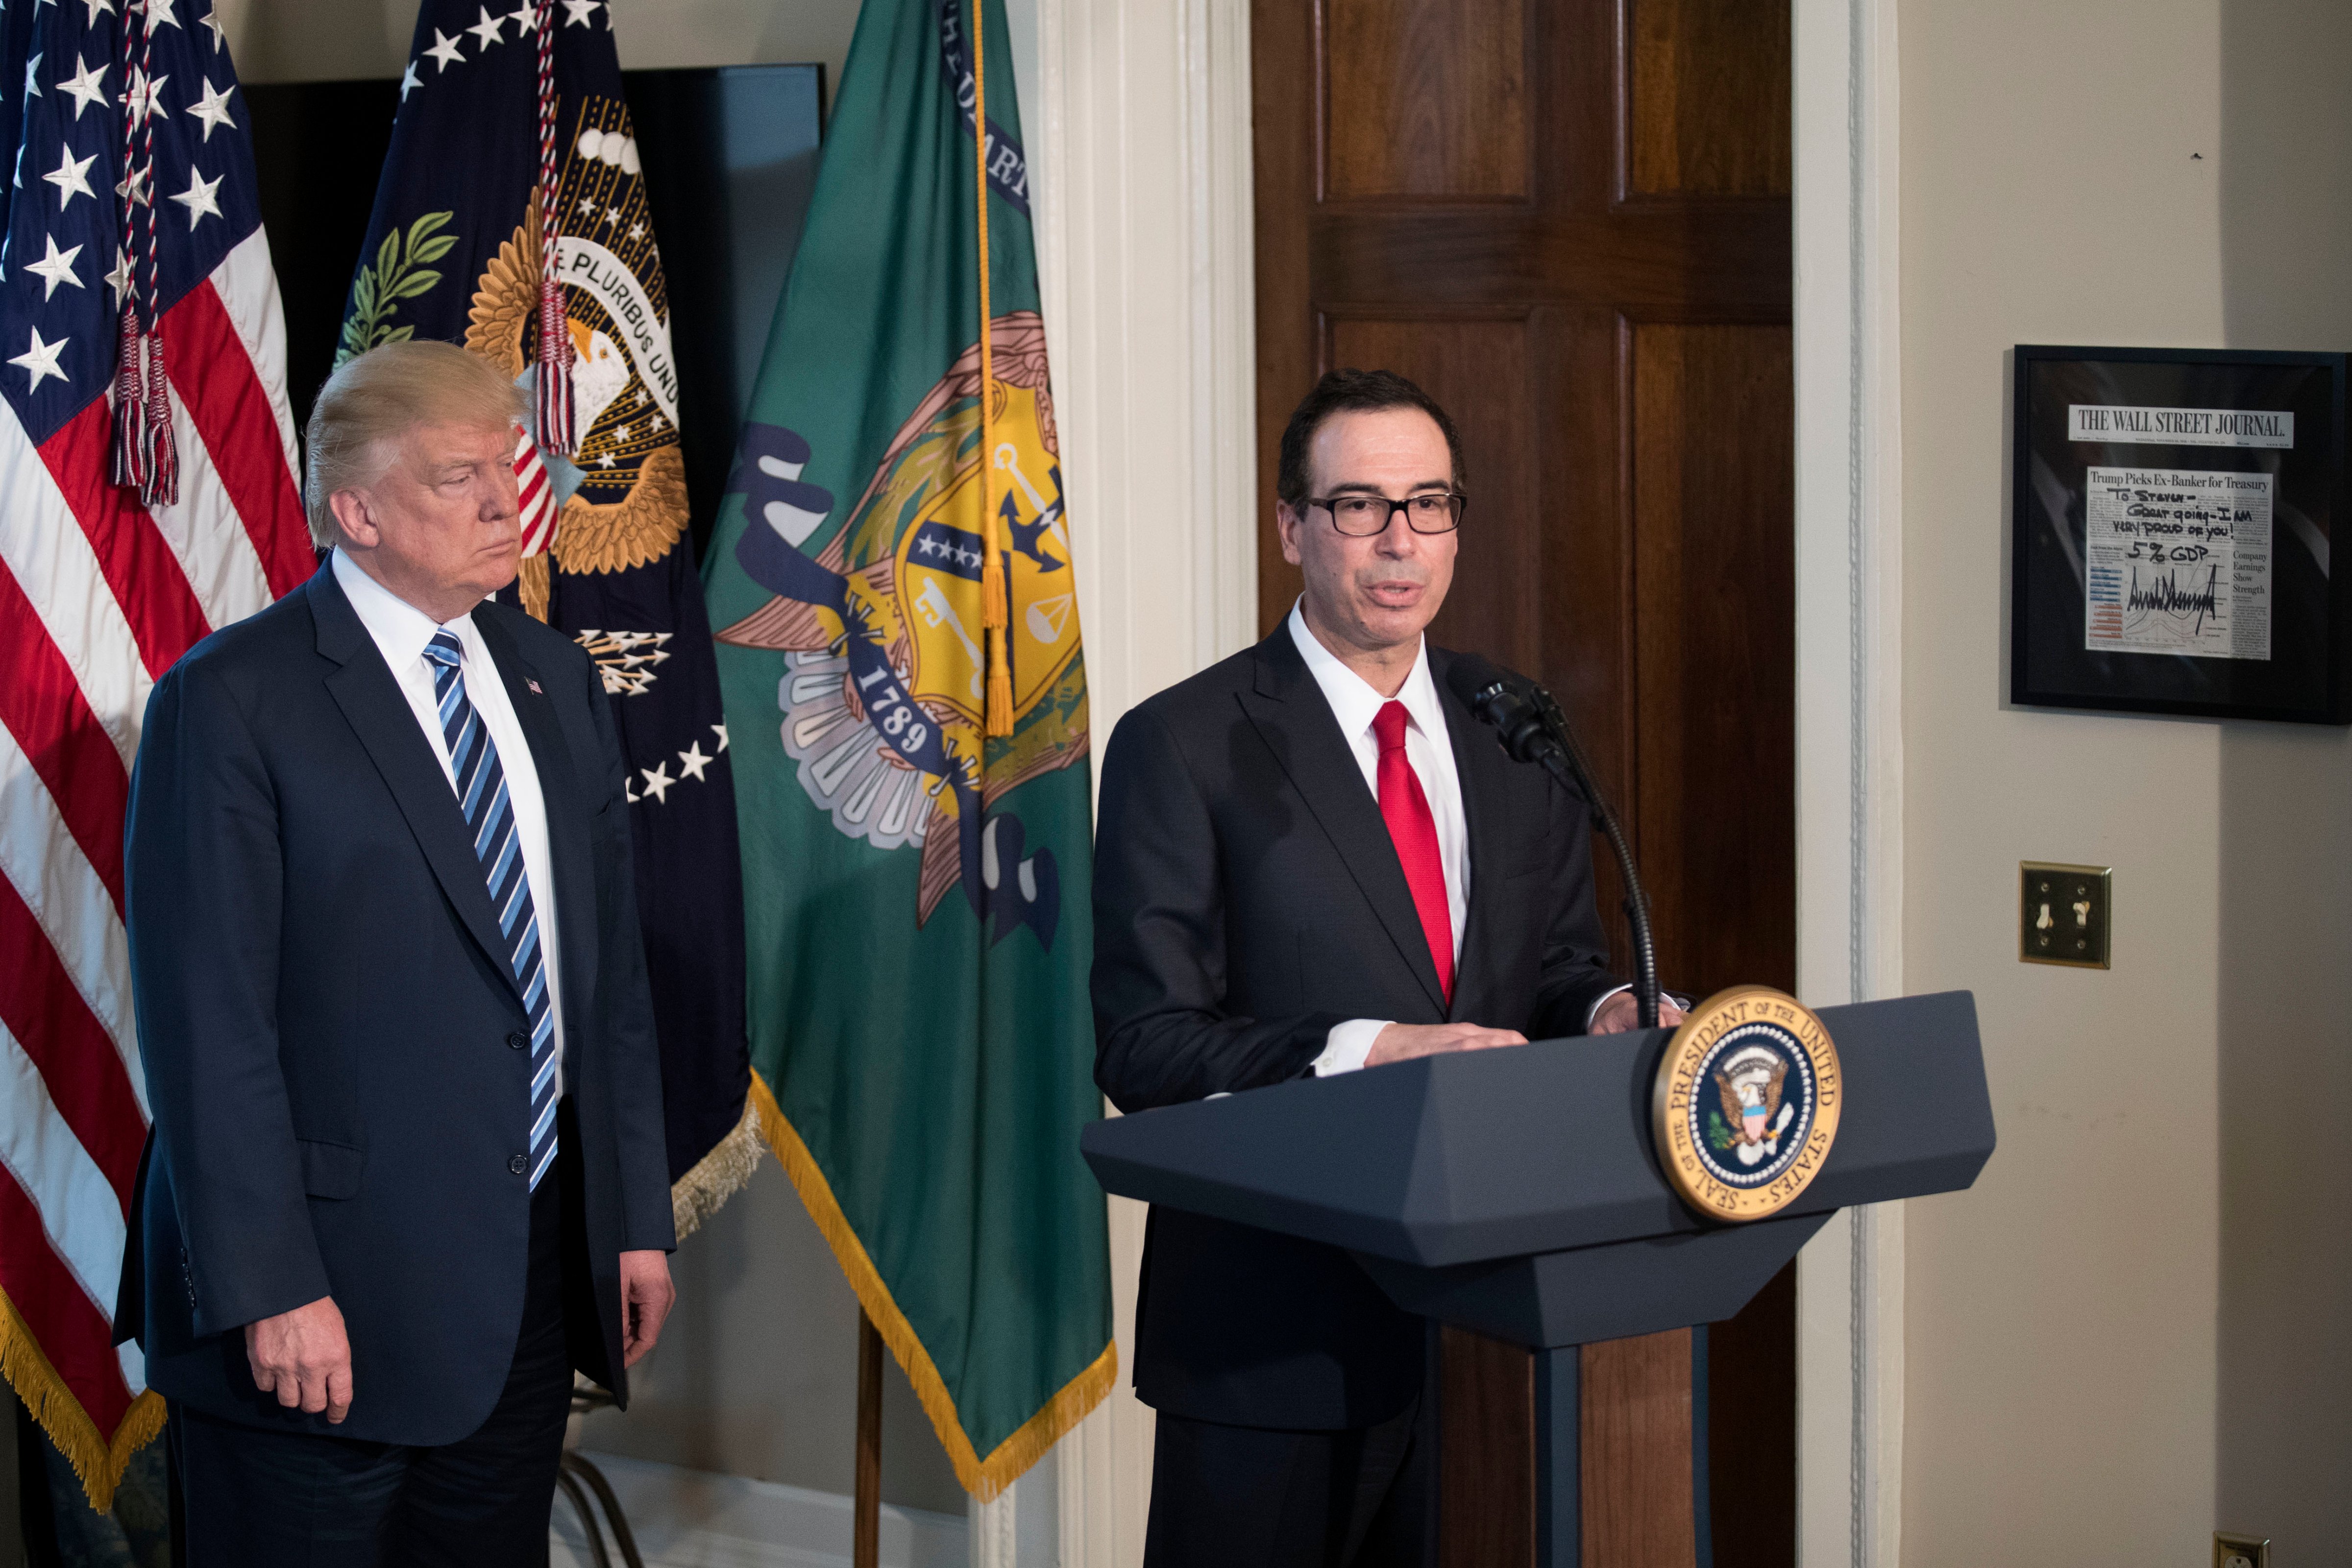 U.S. President Donald Trump (L) listens as Secretary of Treasury Steven Mnuchin (R) delivers remarks in the US Treasury Department building. (Photograph by Shawn Thew—Pool/Getty)